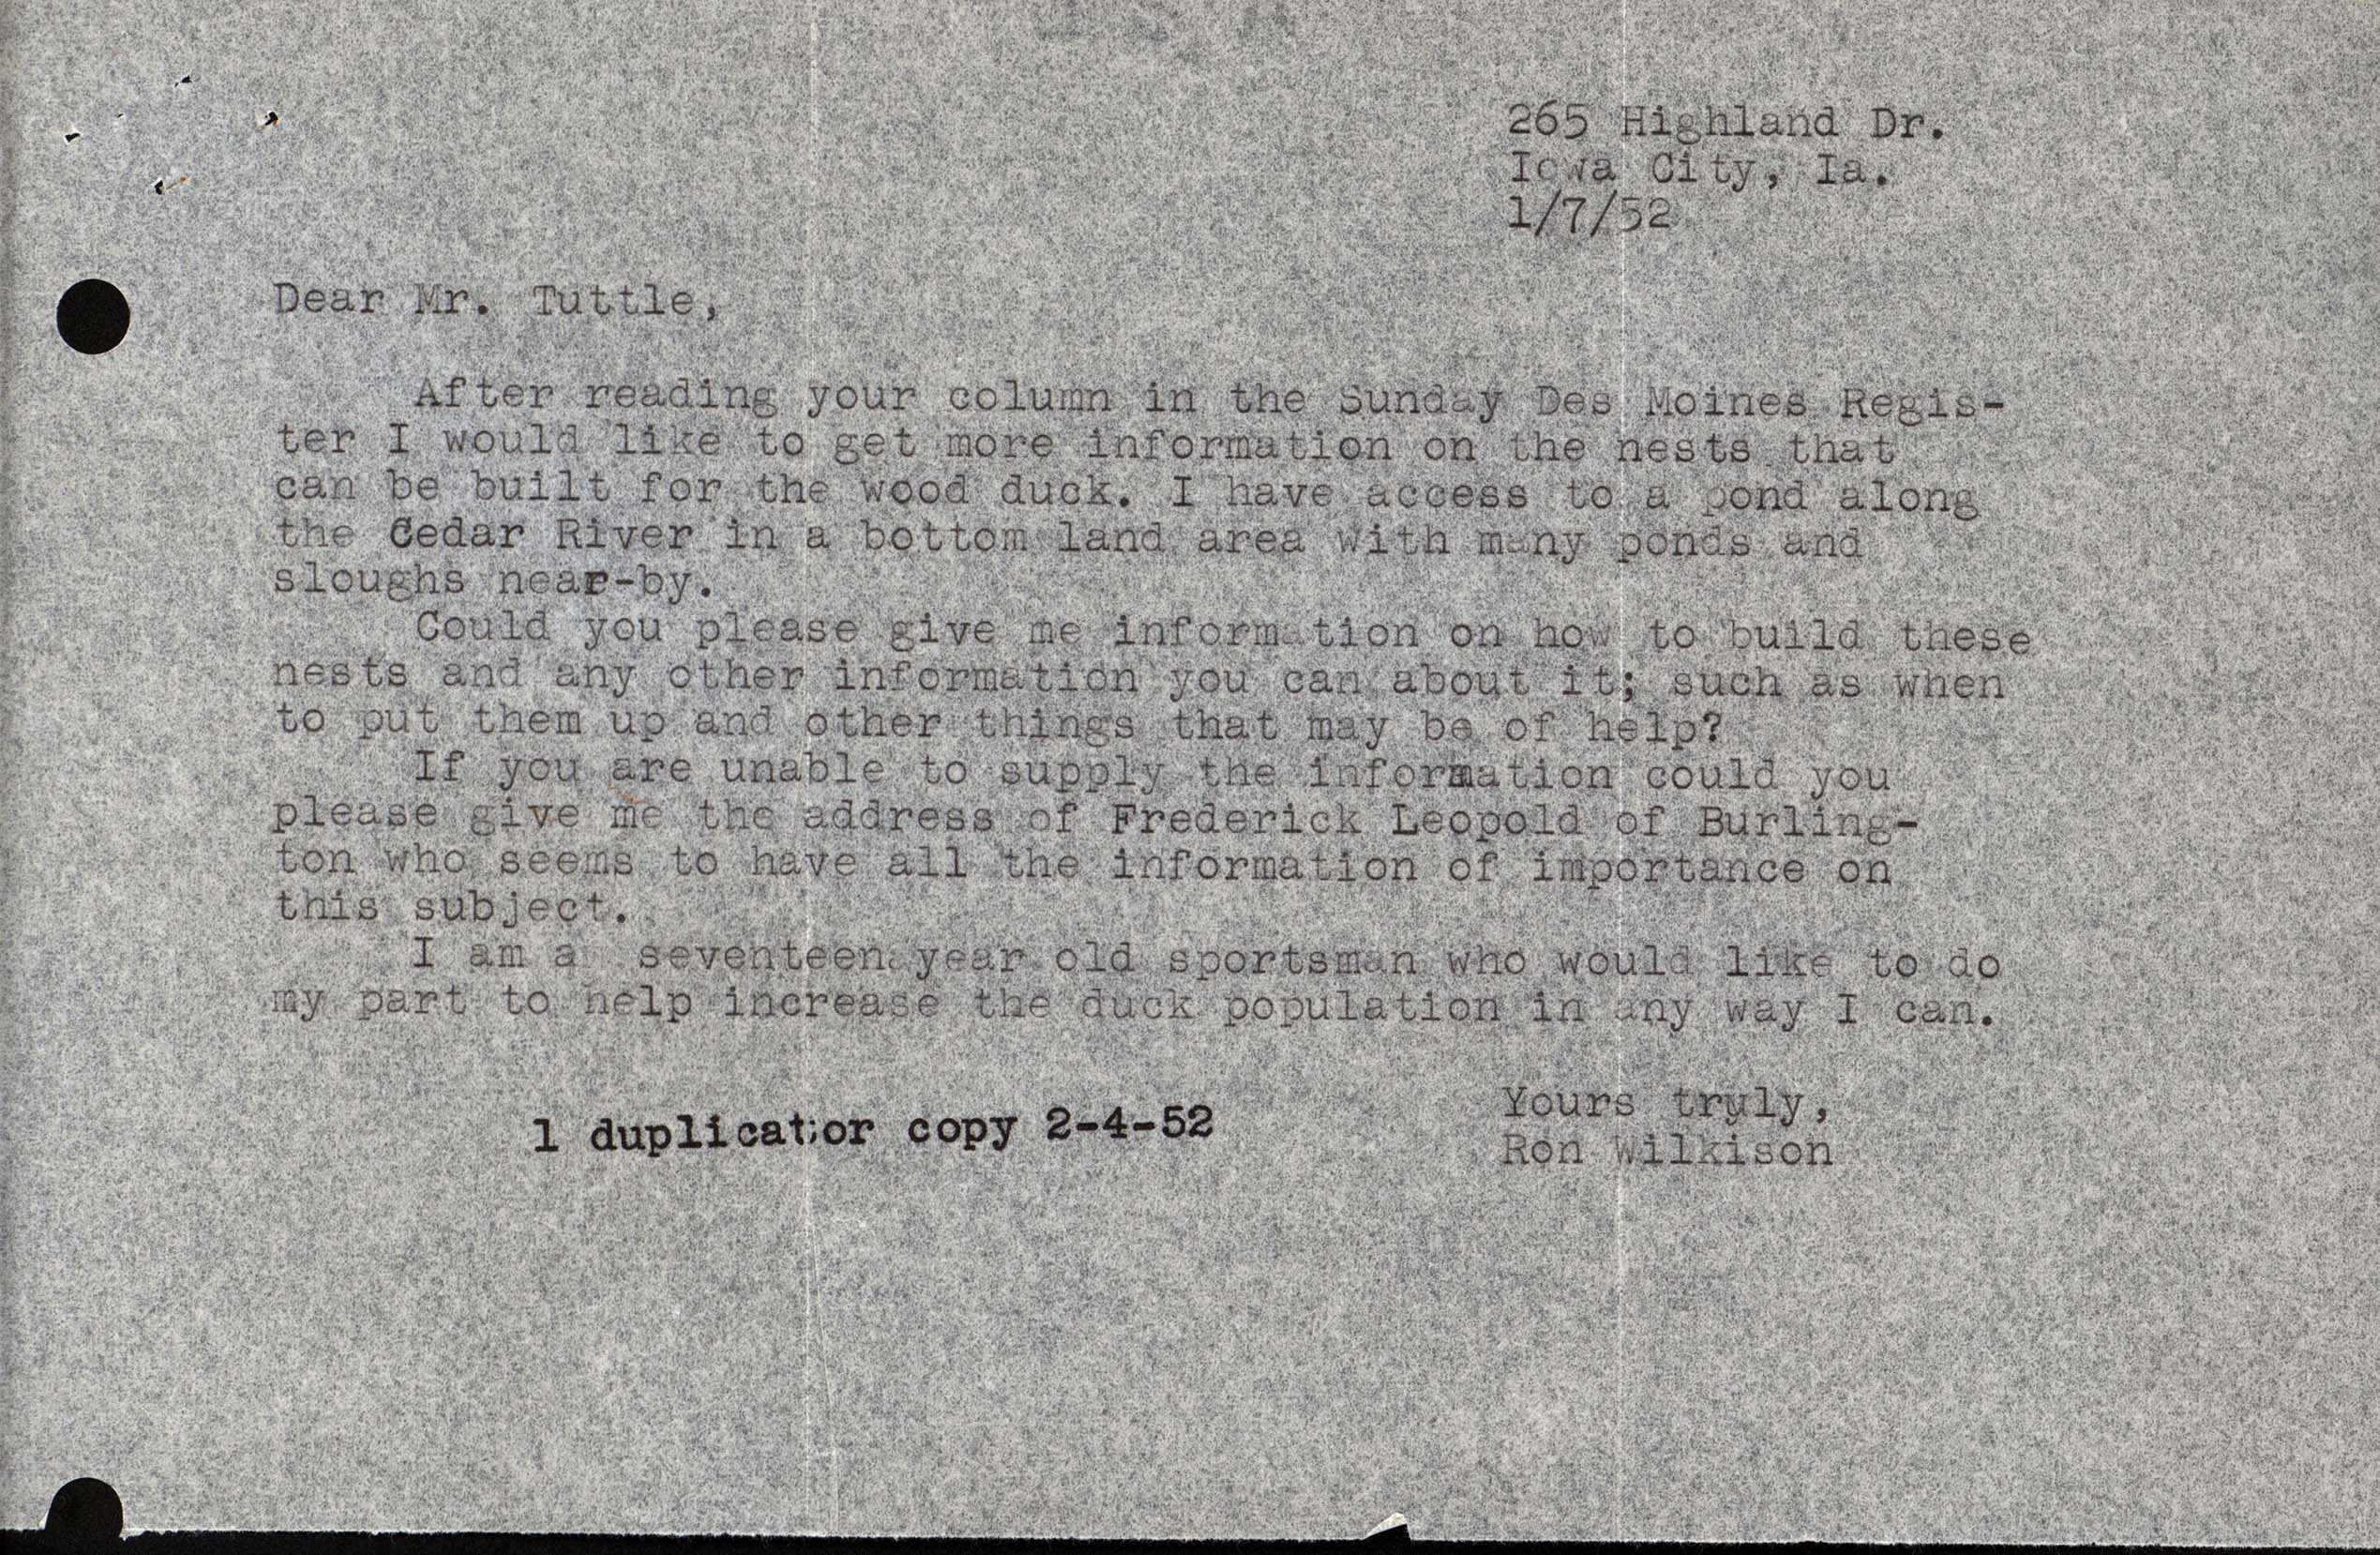 Ries Tuttle letter to Frederic Leopold with a forwarded letter from Ronald H. Wilkison regarding Wood Duck houses, January 9, 1952